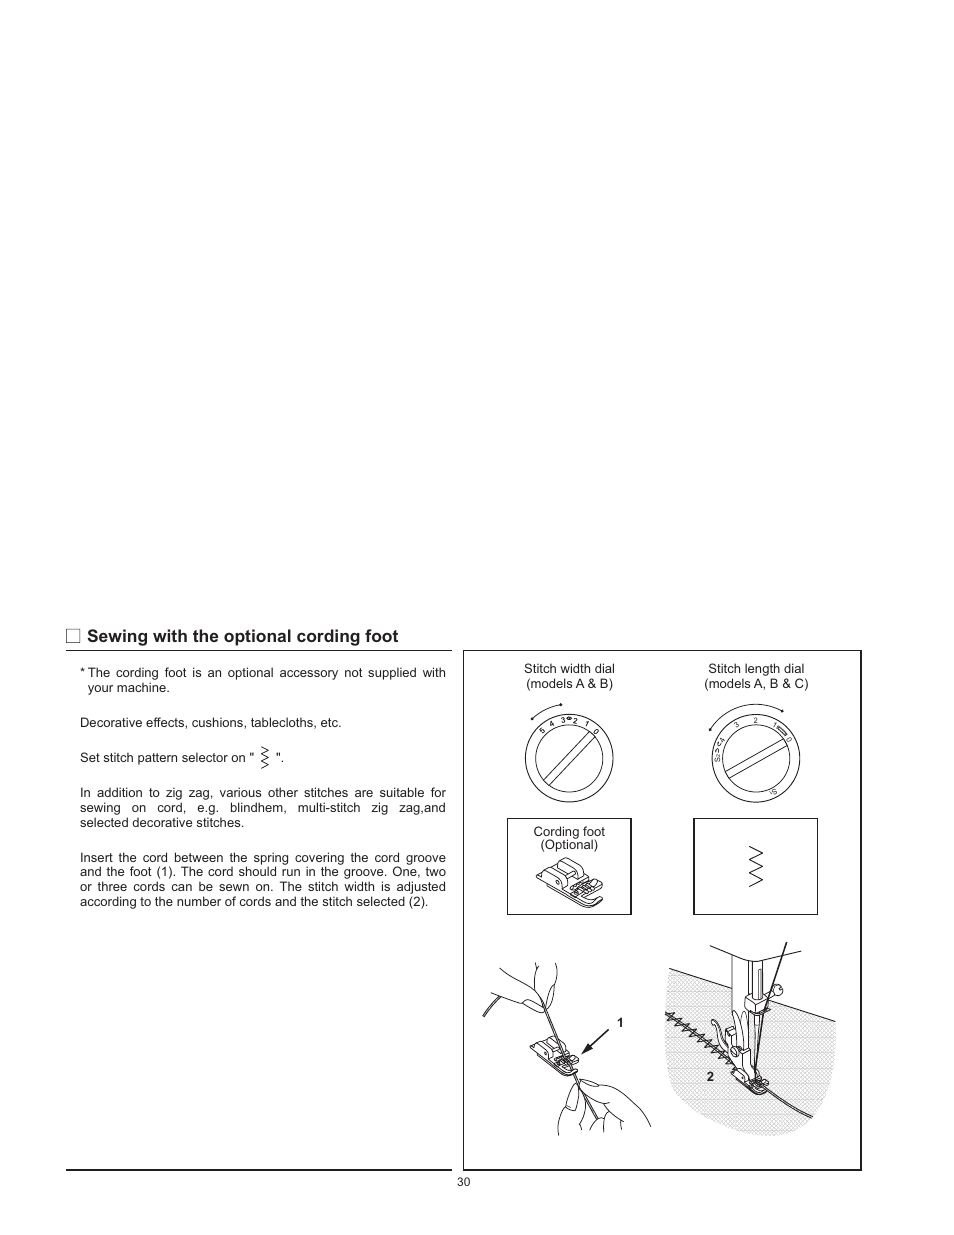 Sewing with the optional cording foot | SINGER 1120 User Manual | Page 33 / 38